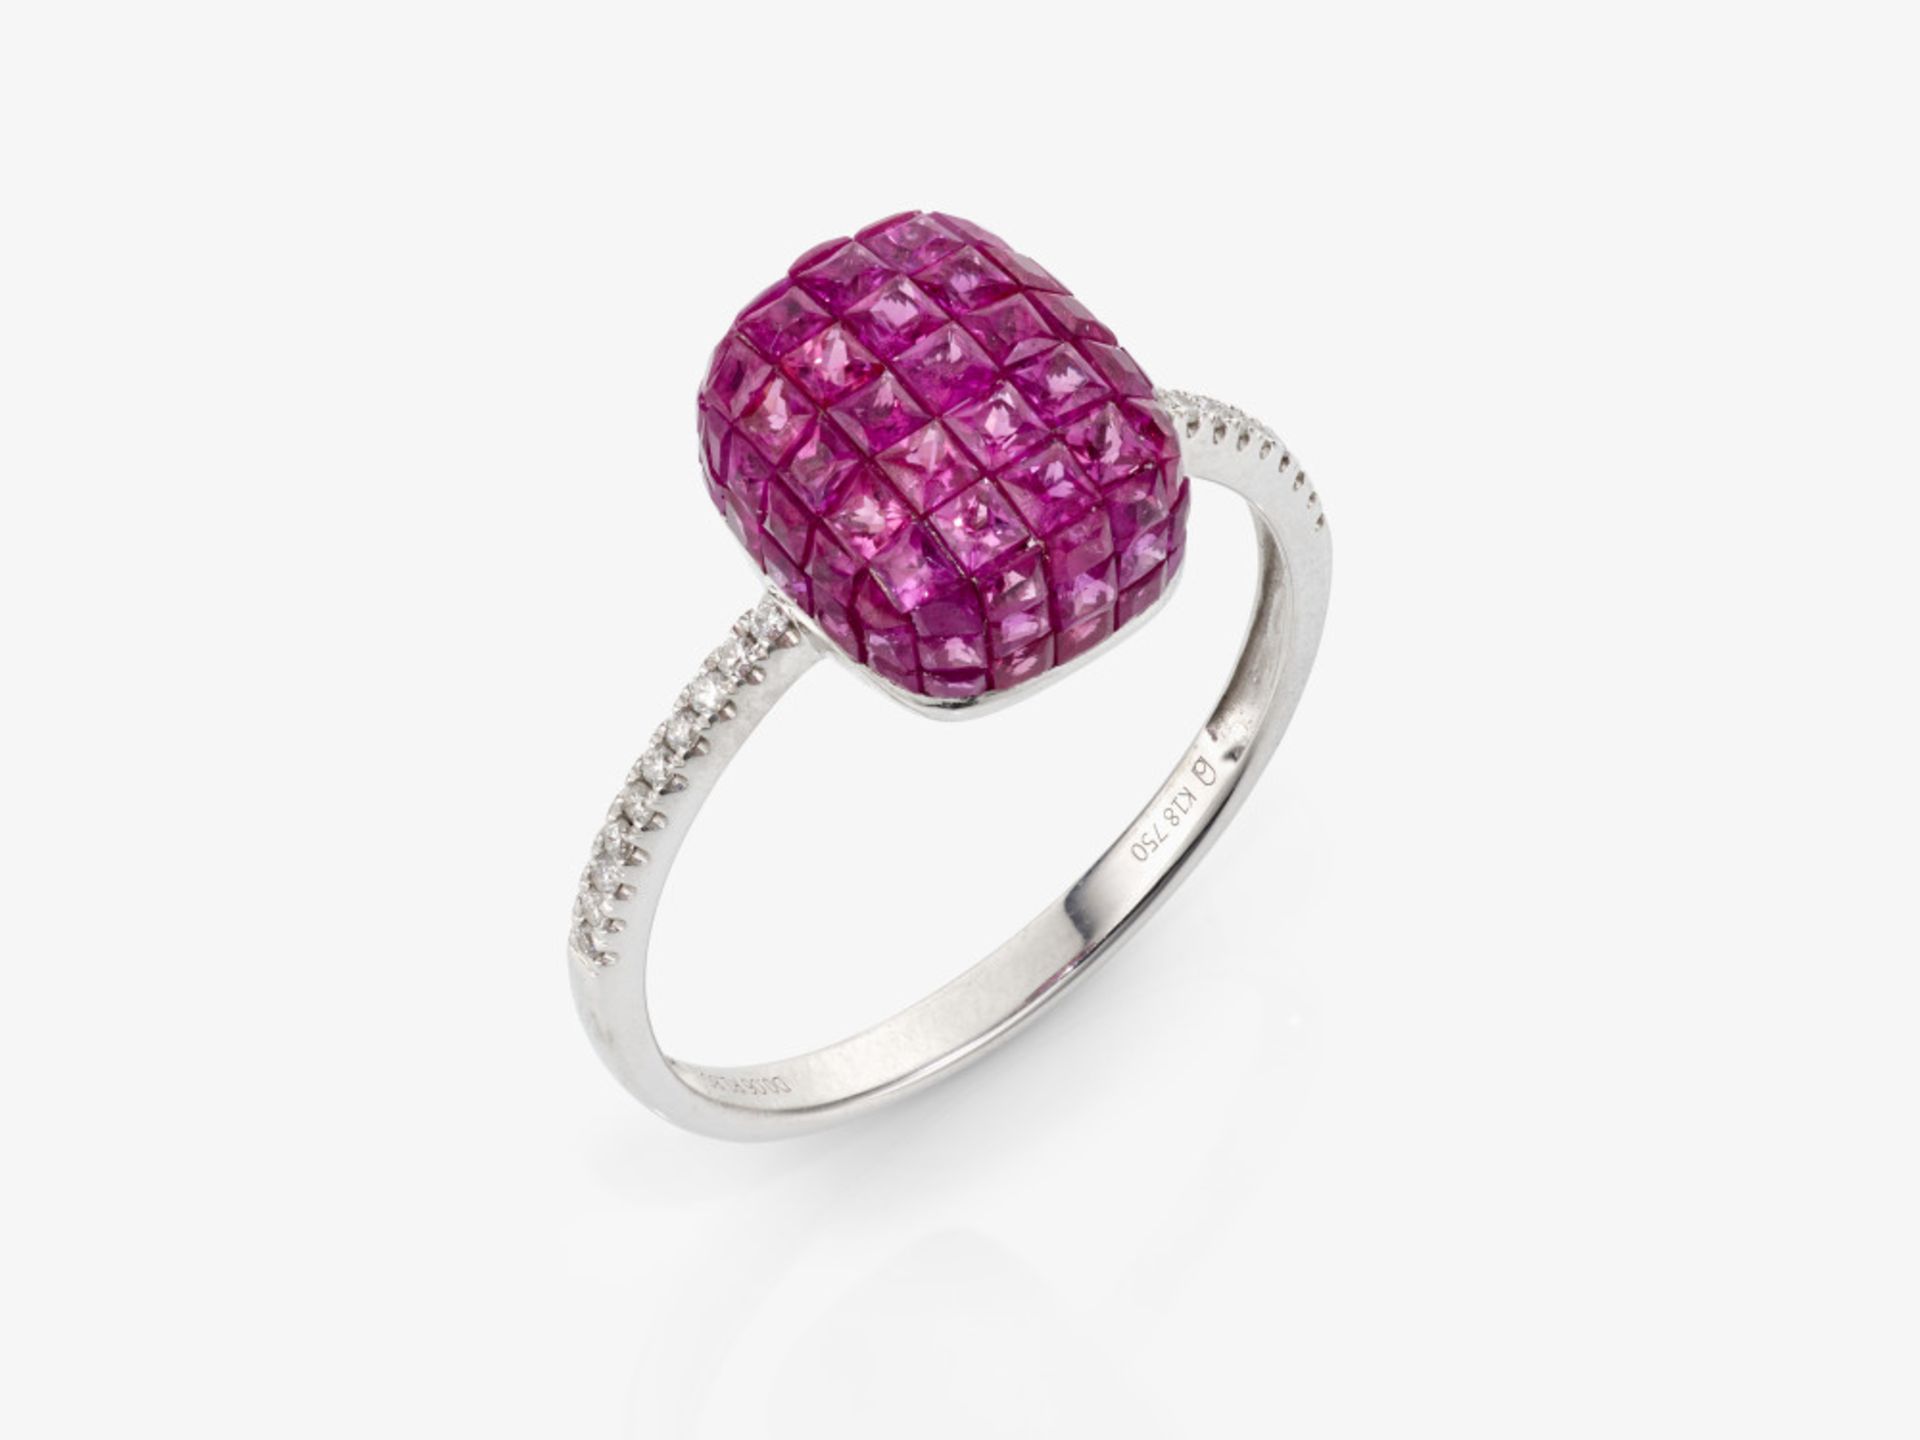 A modern delicate cocktail ring decorated with rubies and brilliant-cut diamonds